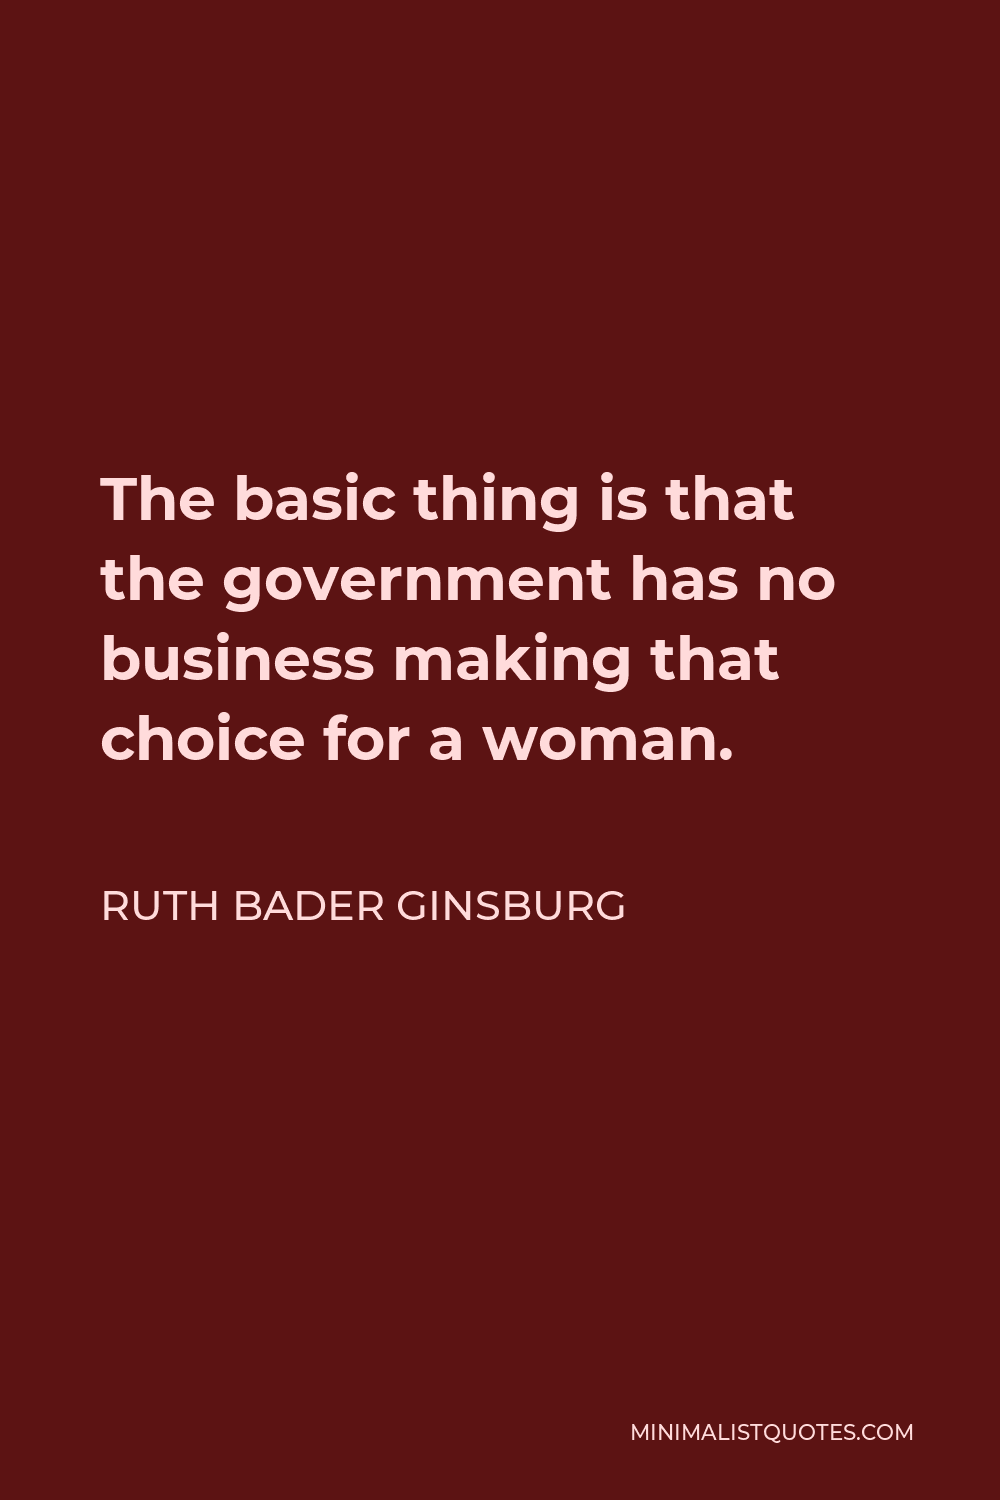 Ruth Bader Ginsburg Quote - The basic thing is that the government has no business making that choice for a woman.